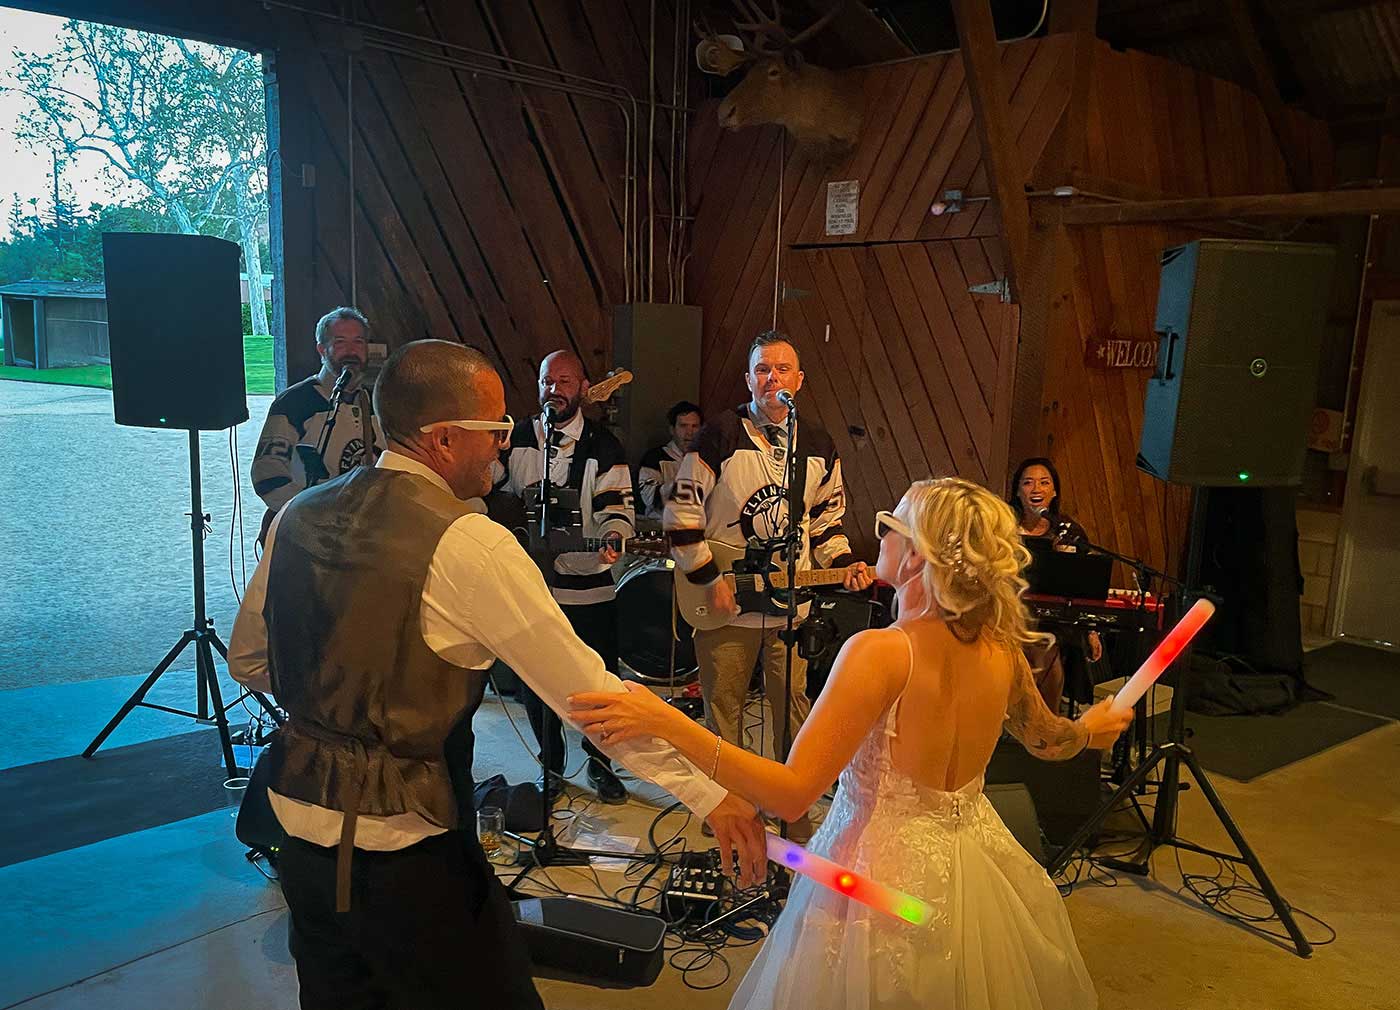 Bride and groom dancing in front of The Morning Spins band